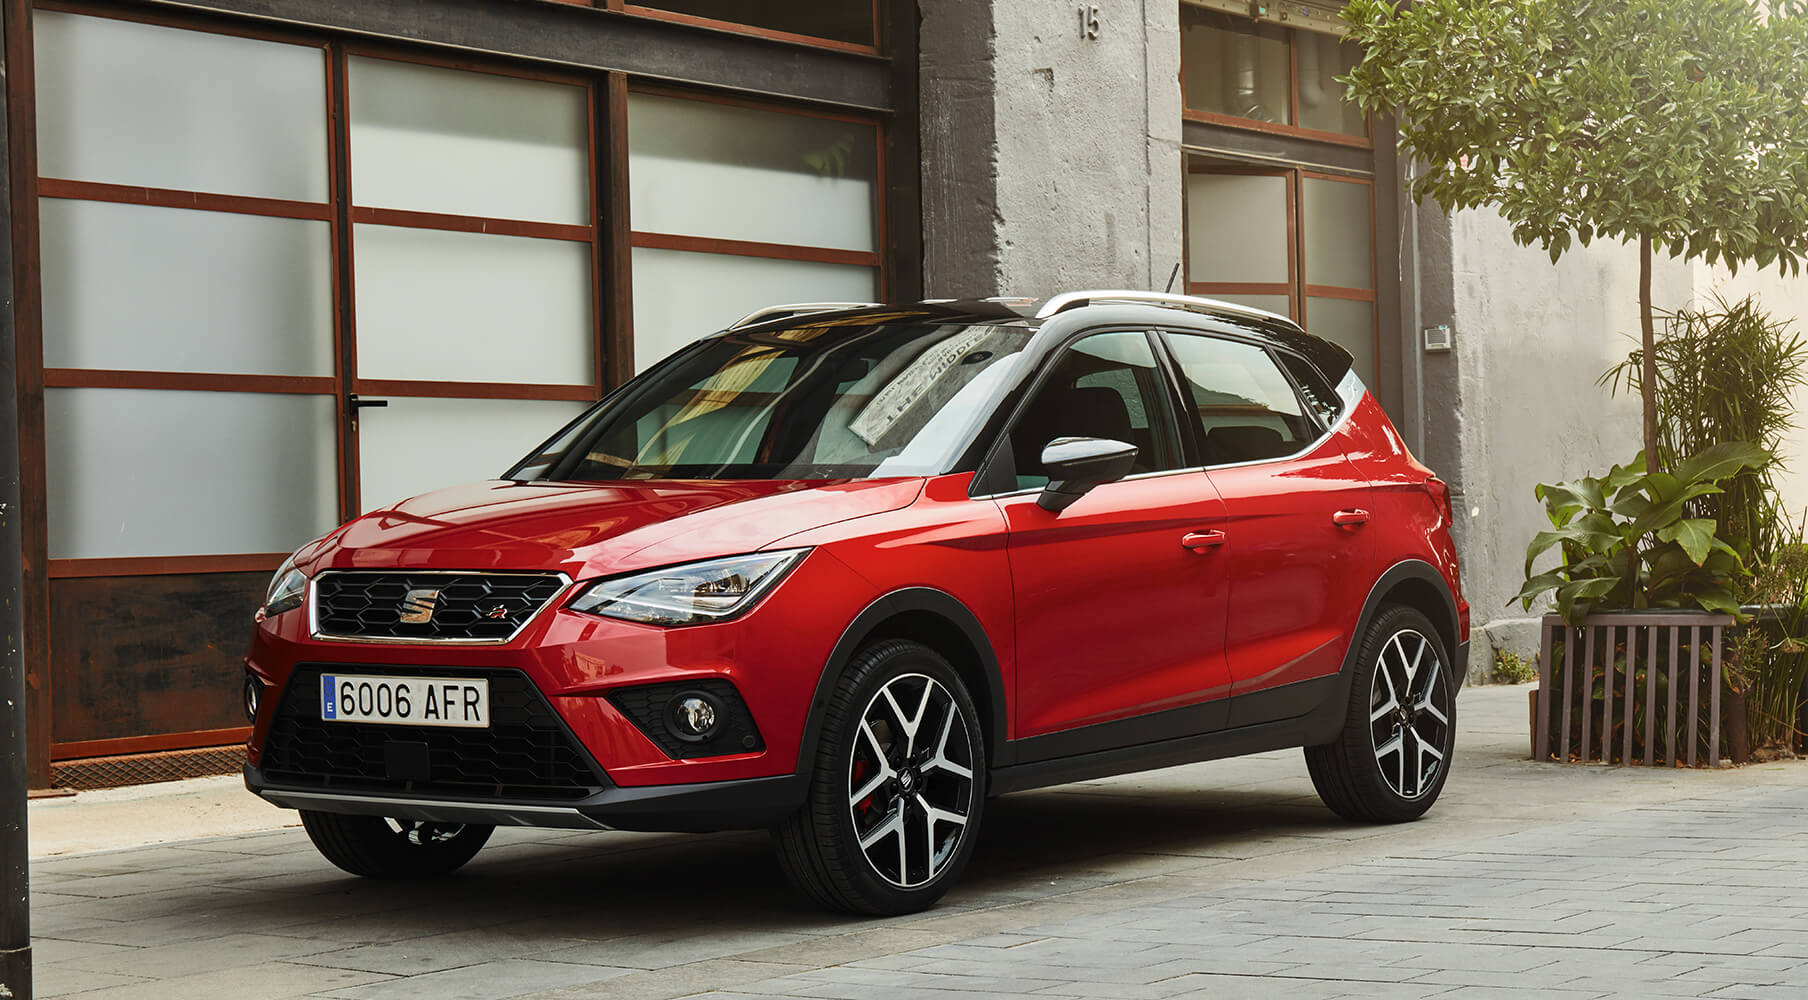 SEAT Arona crossover SUV – SEAT cars – small SUV crossover size